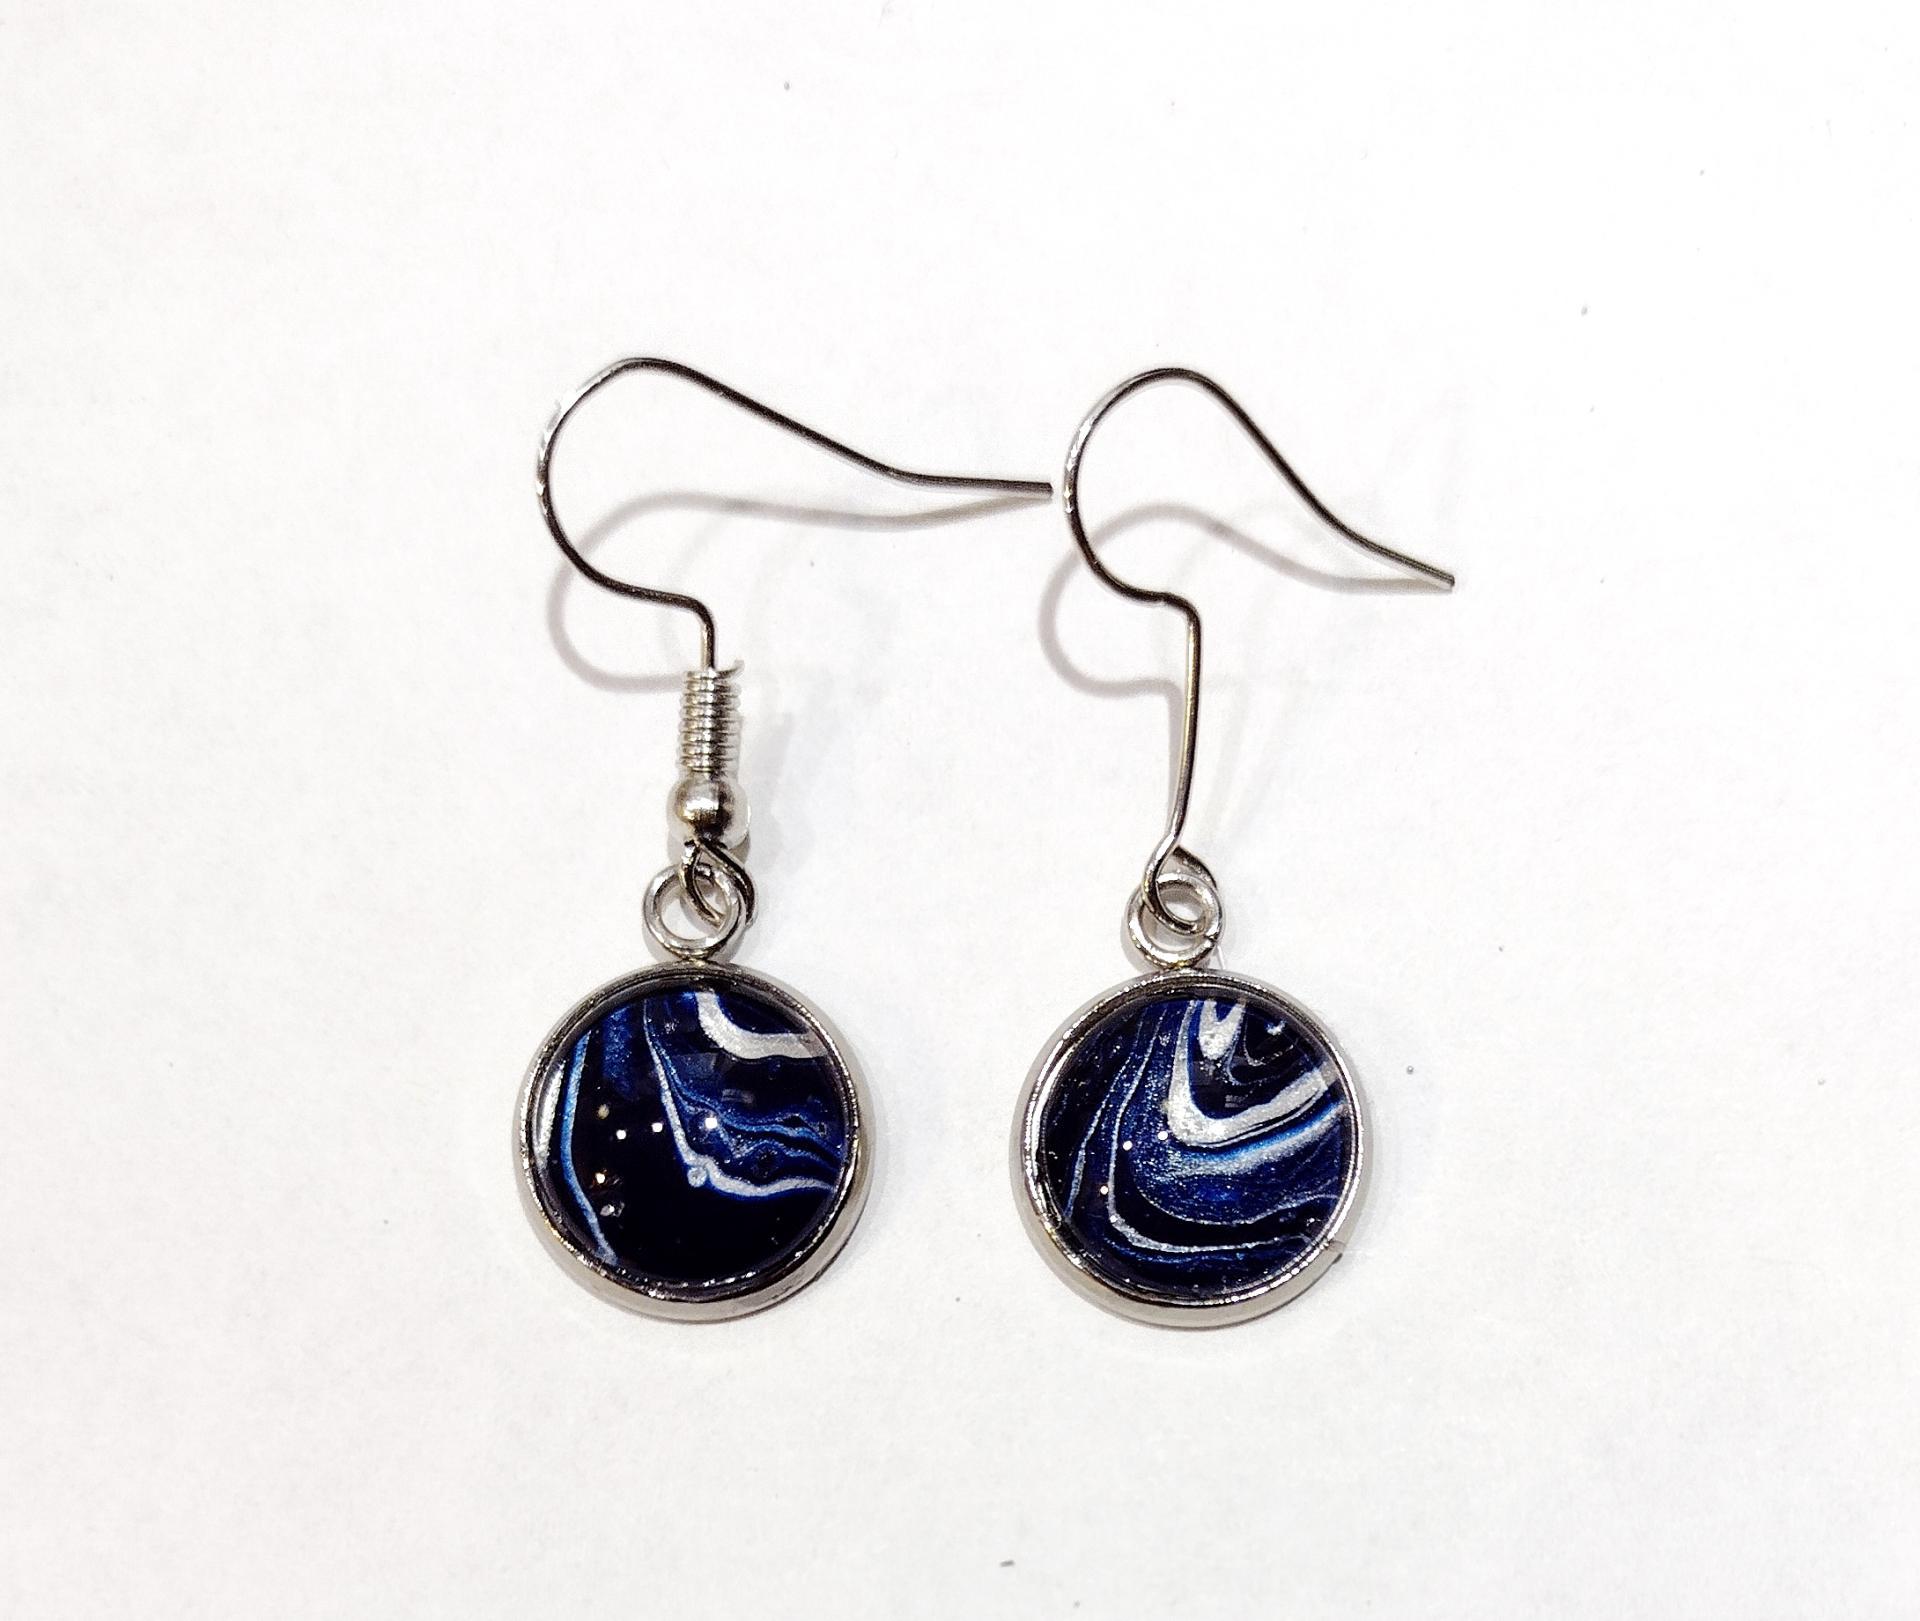 Painted Earrings, Navy Blue and Silver